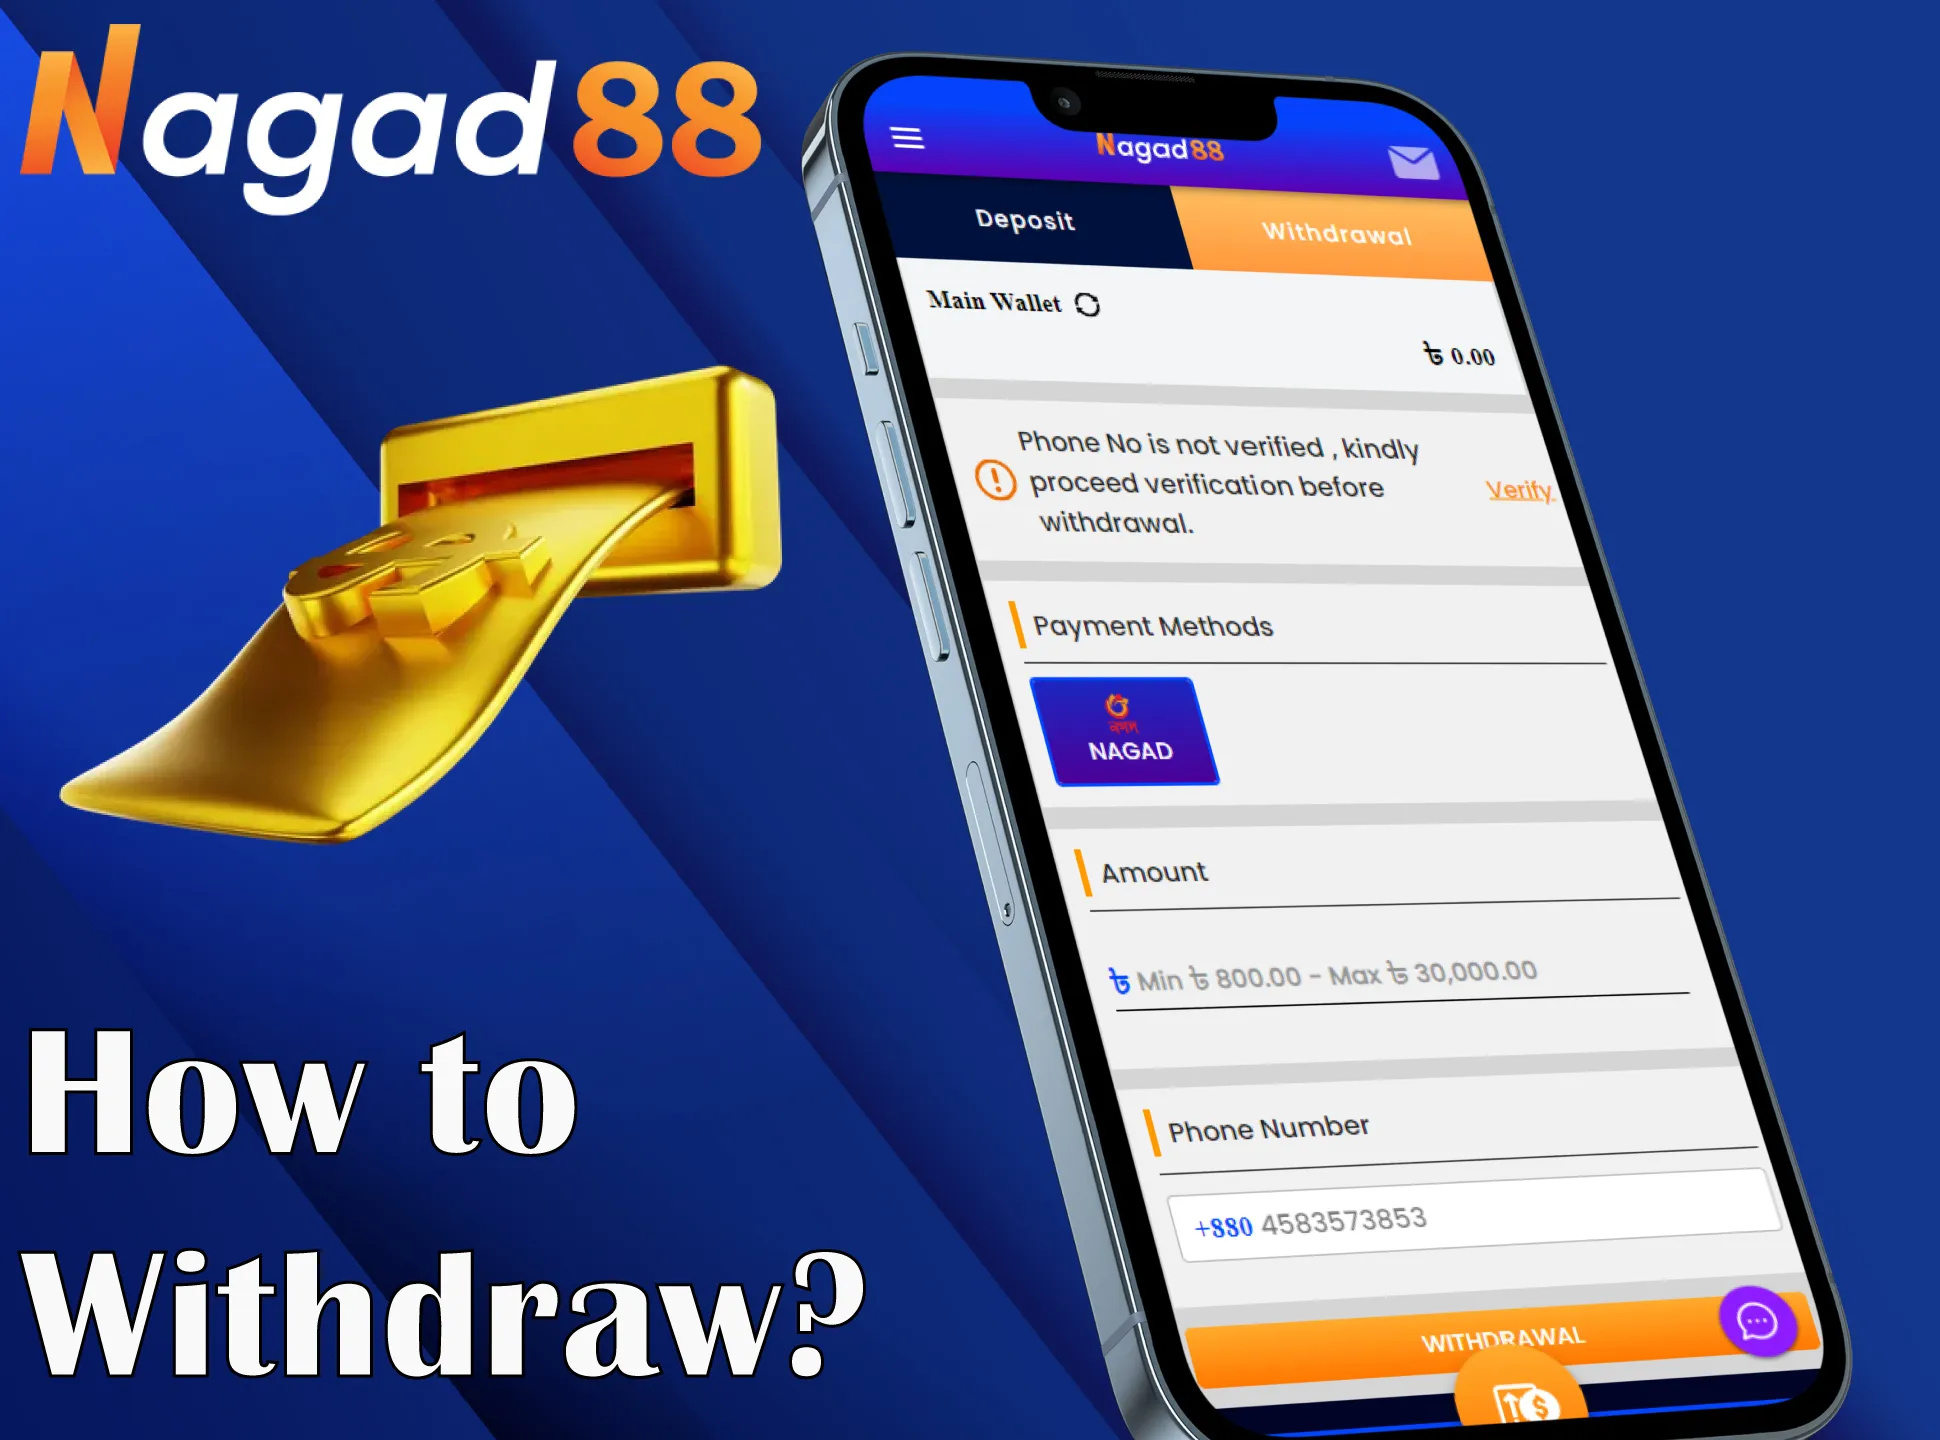 You can withdraw your winnings in BDT with any convenient payment method.